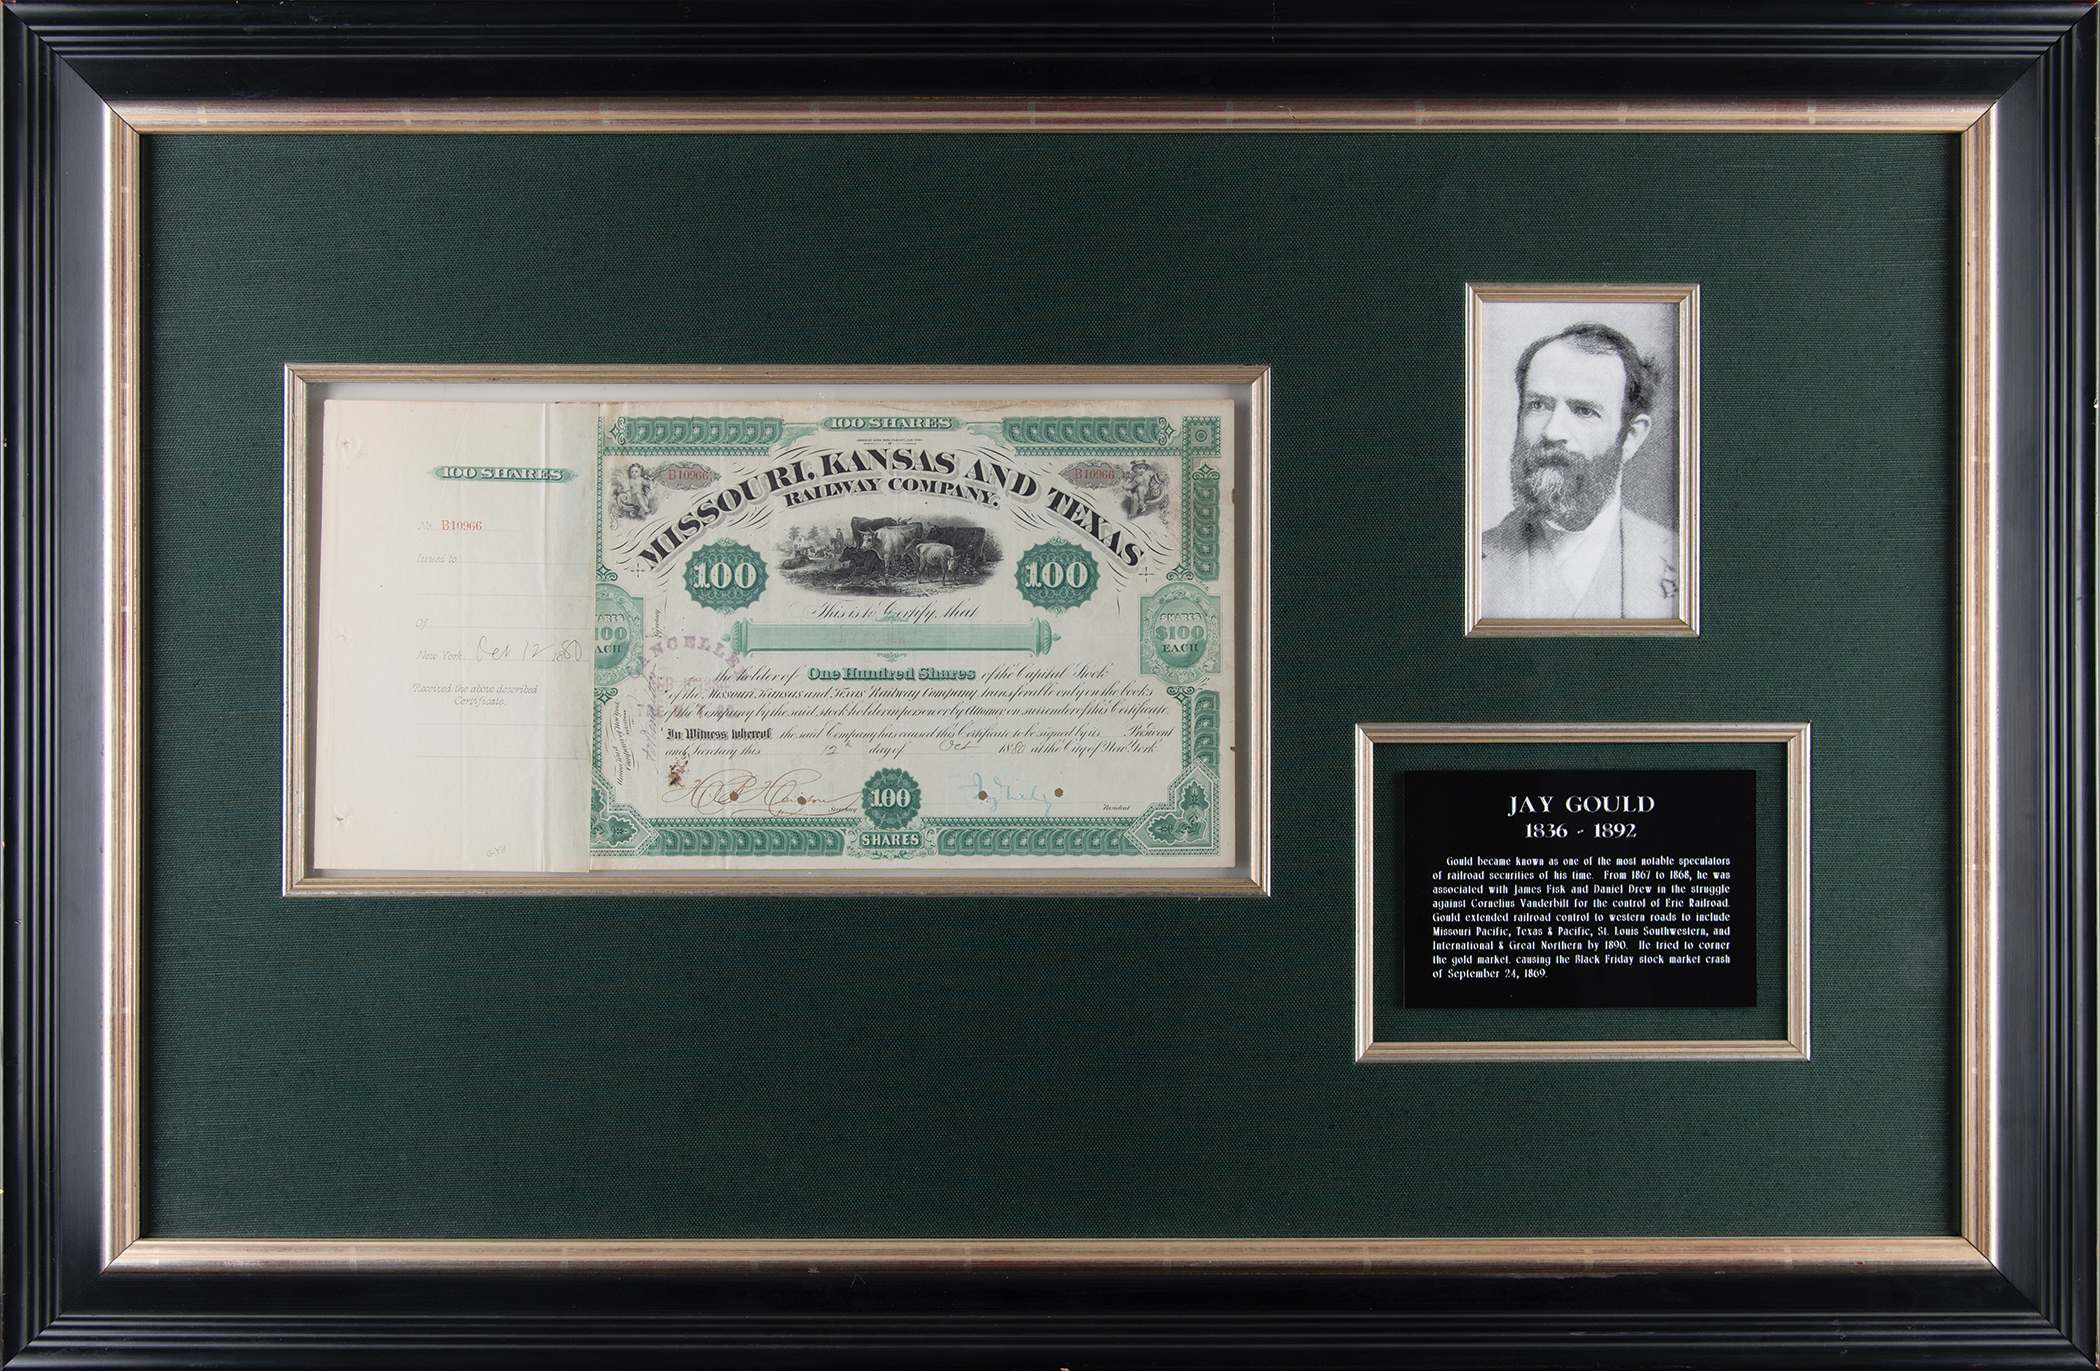 Lot #332 Jay Gould Document Signed - Image 1